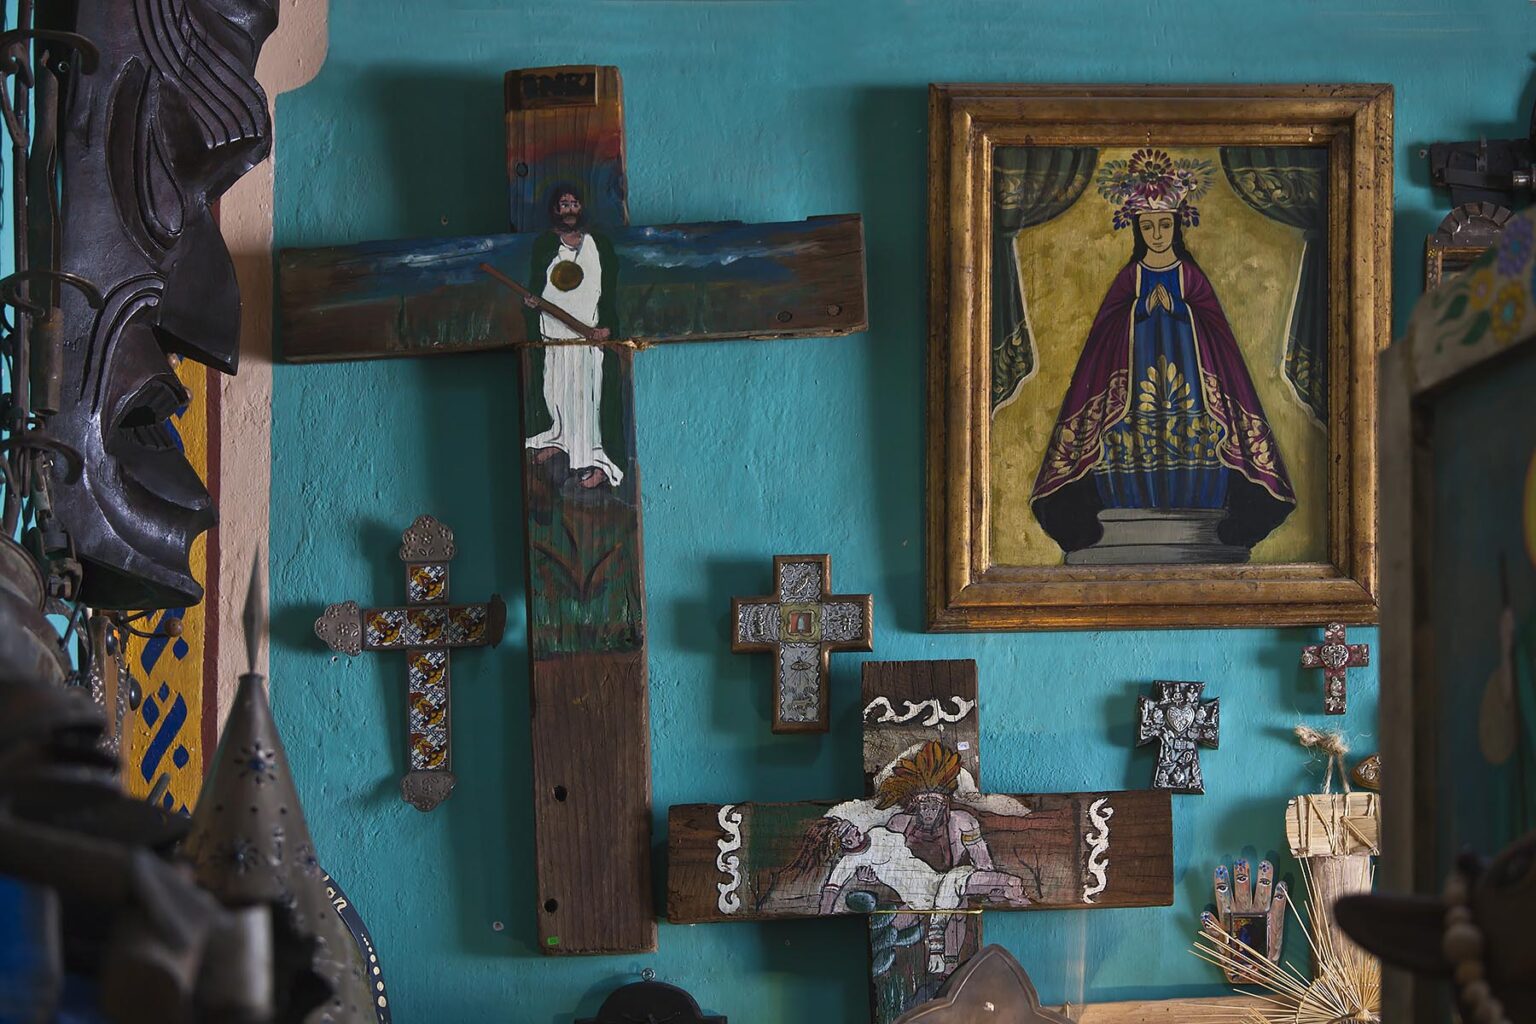 CATHOLIC CROSSES and a Christian painting in a shop - MINERAL DE POZOS,  GUANAJUATO, MEXICO